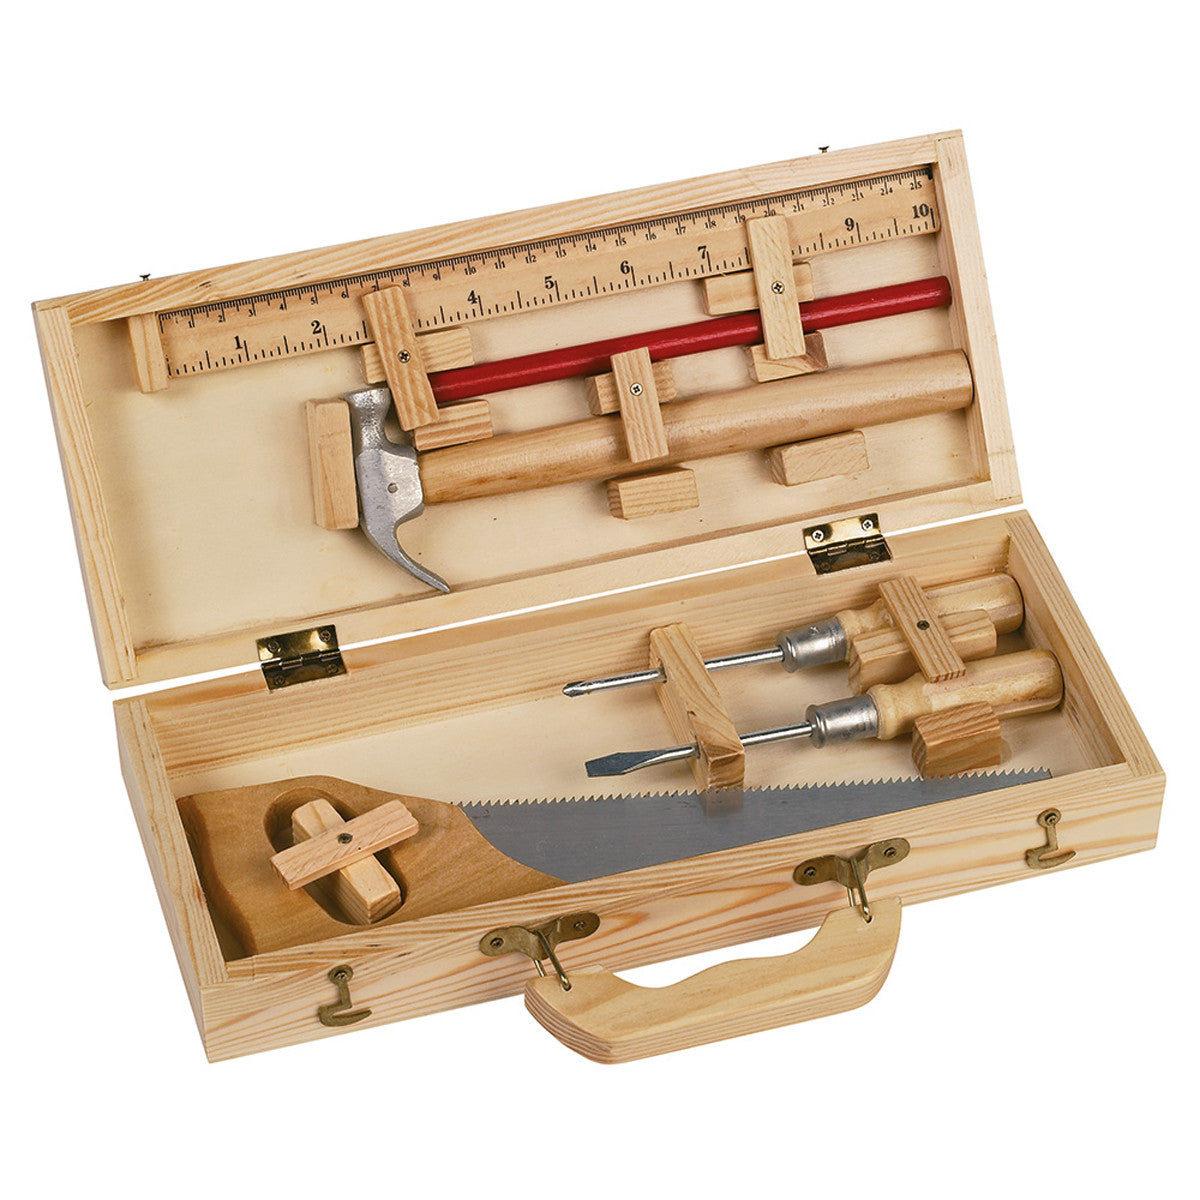 Moulin Roty Small Tool Box Set – My Small World Toy Store